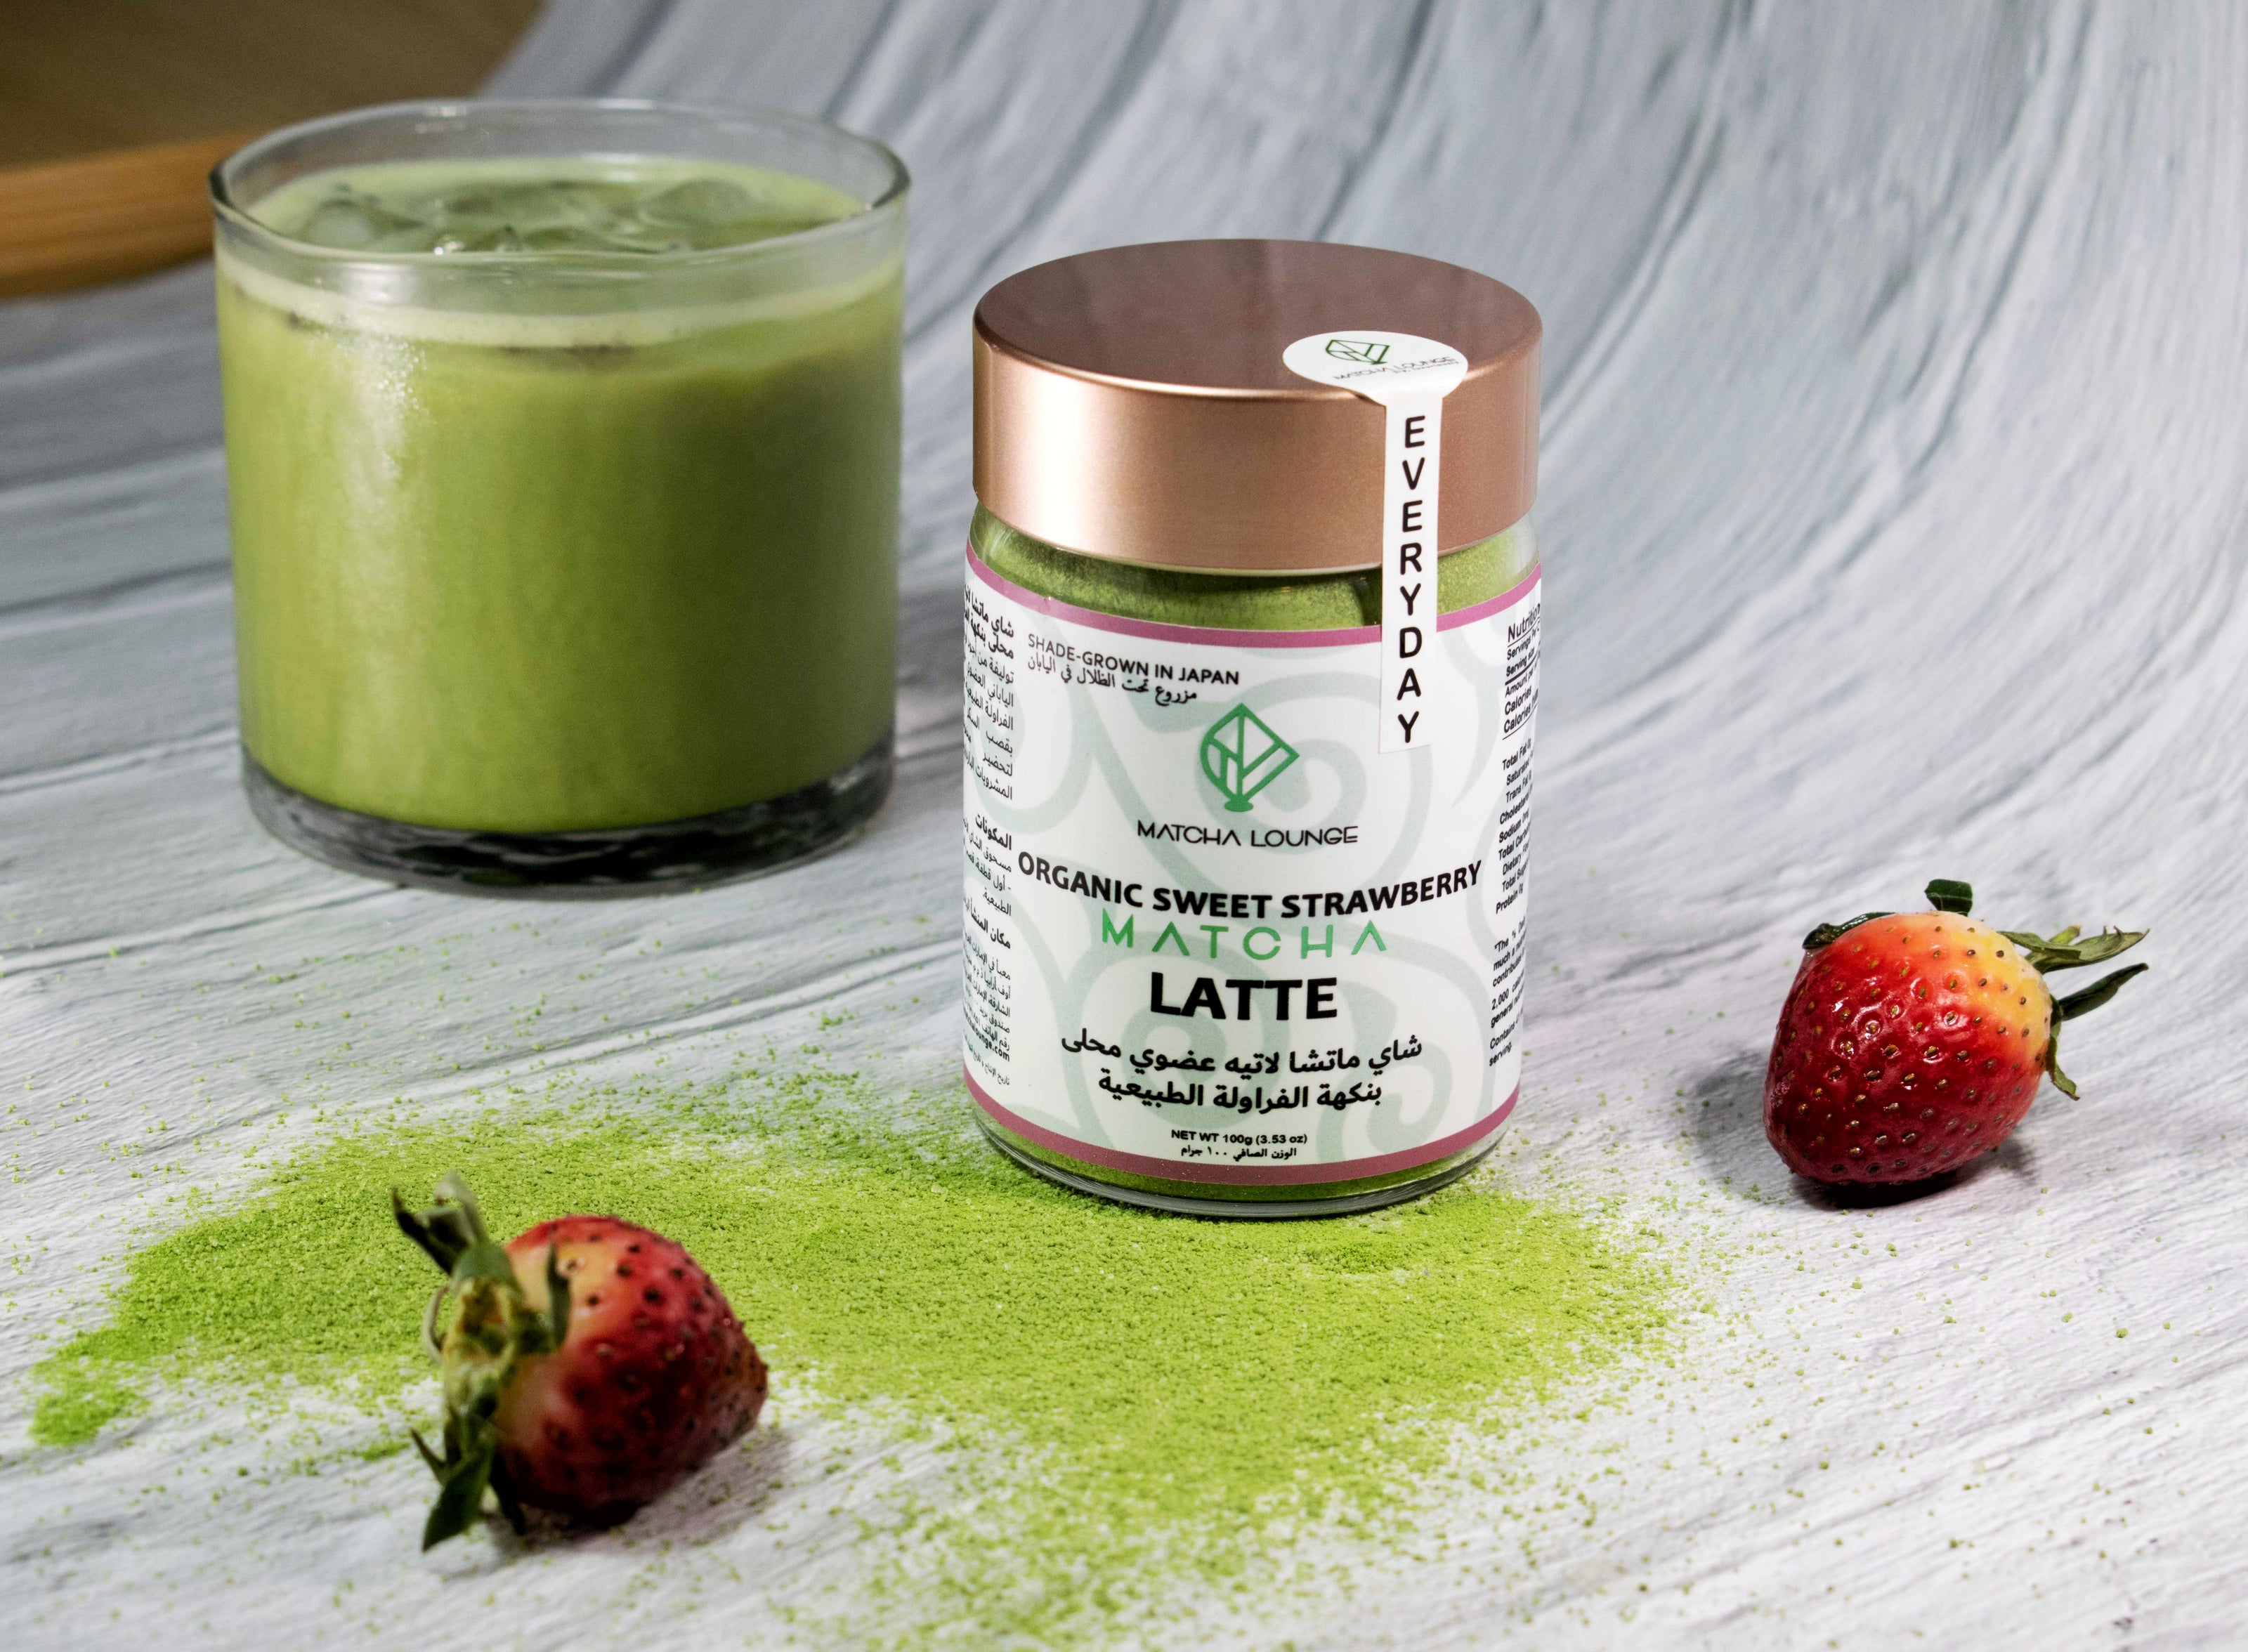 Harvested and handpicked in Uji during the first flush, our organic strawberry matcha is the perfect base for dreamy lattes. Combined with natural strawberry flavor and cane sugar, it is the ideal blend for premium latte drinks, cold brew, cocktails. Delivered to you across Dubai and the UAE.